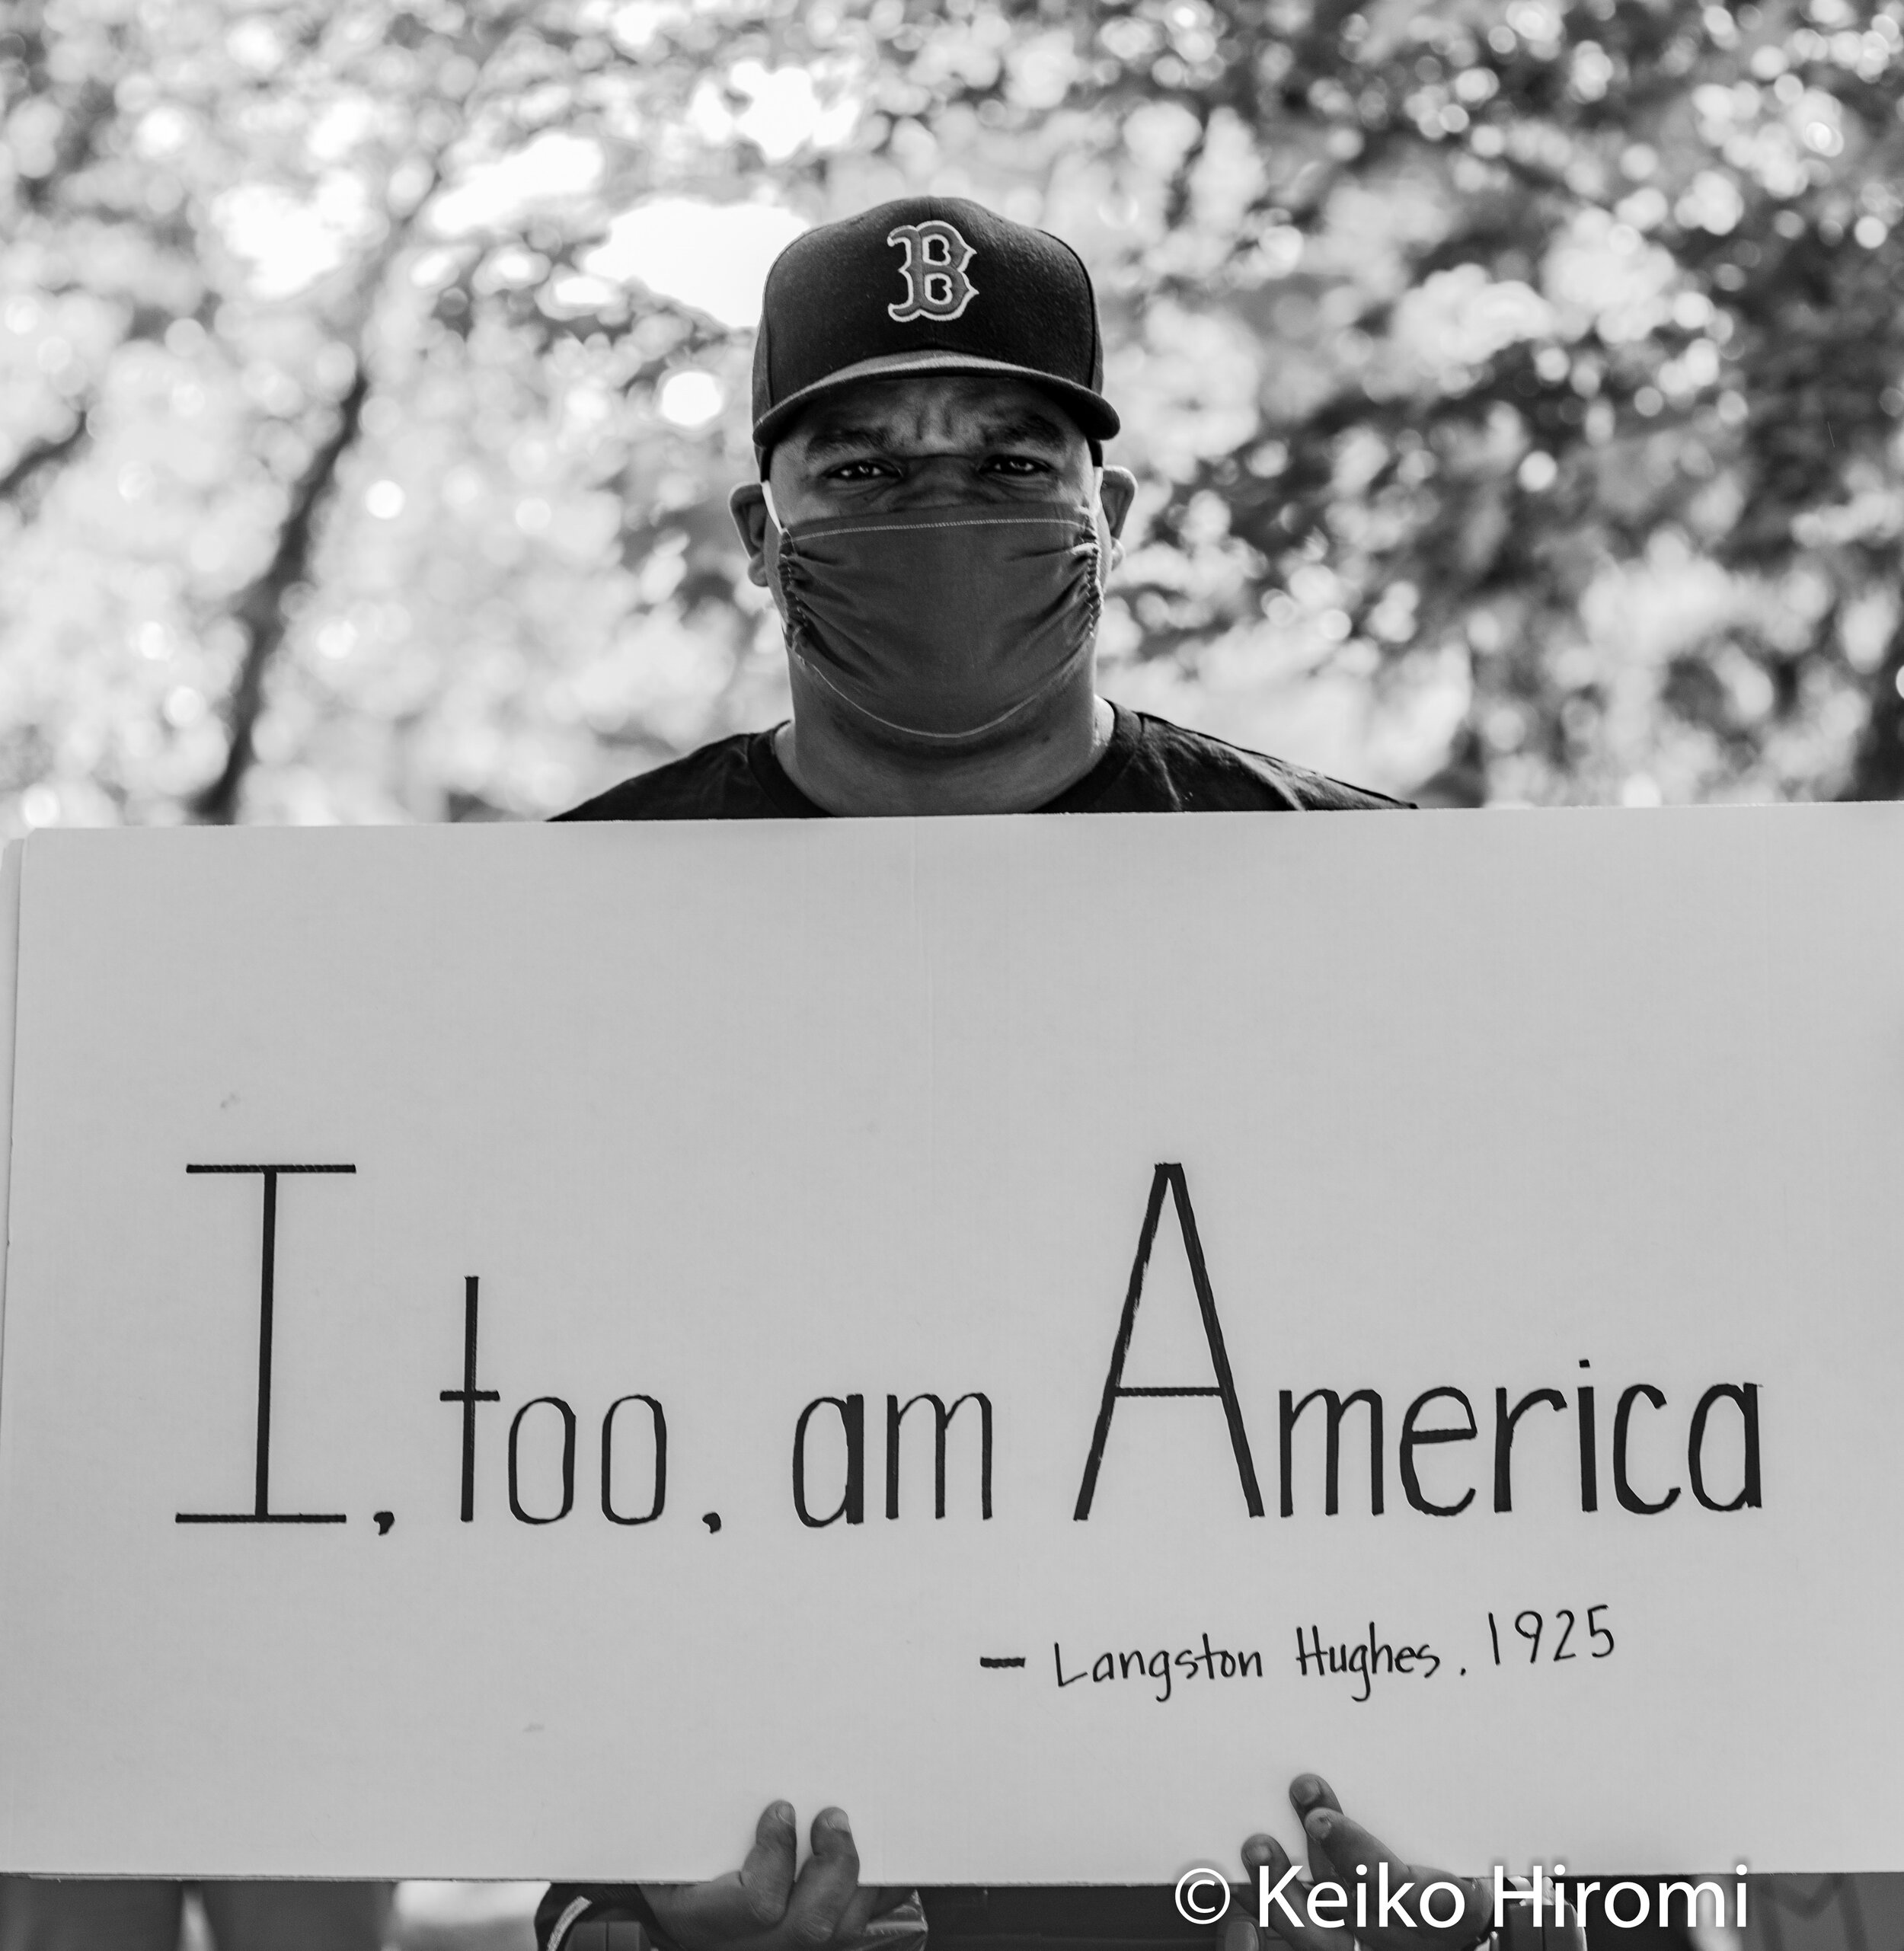  June 8, 2020, Lynnfield, Massachusetts, USA: A protester holds a sign "I, too am America" during a rally in response to deaths of George Floyd and against police brutality and racism in Lynnfield. 